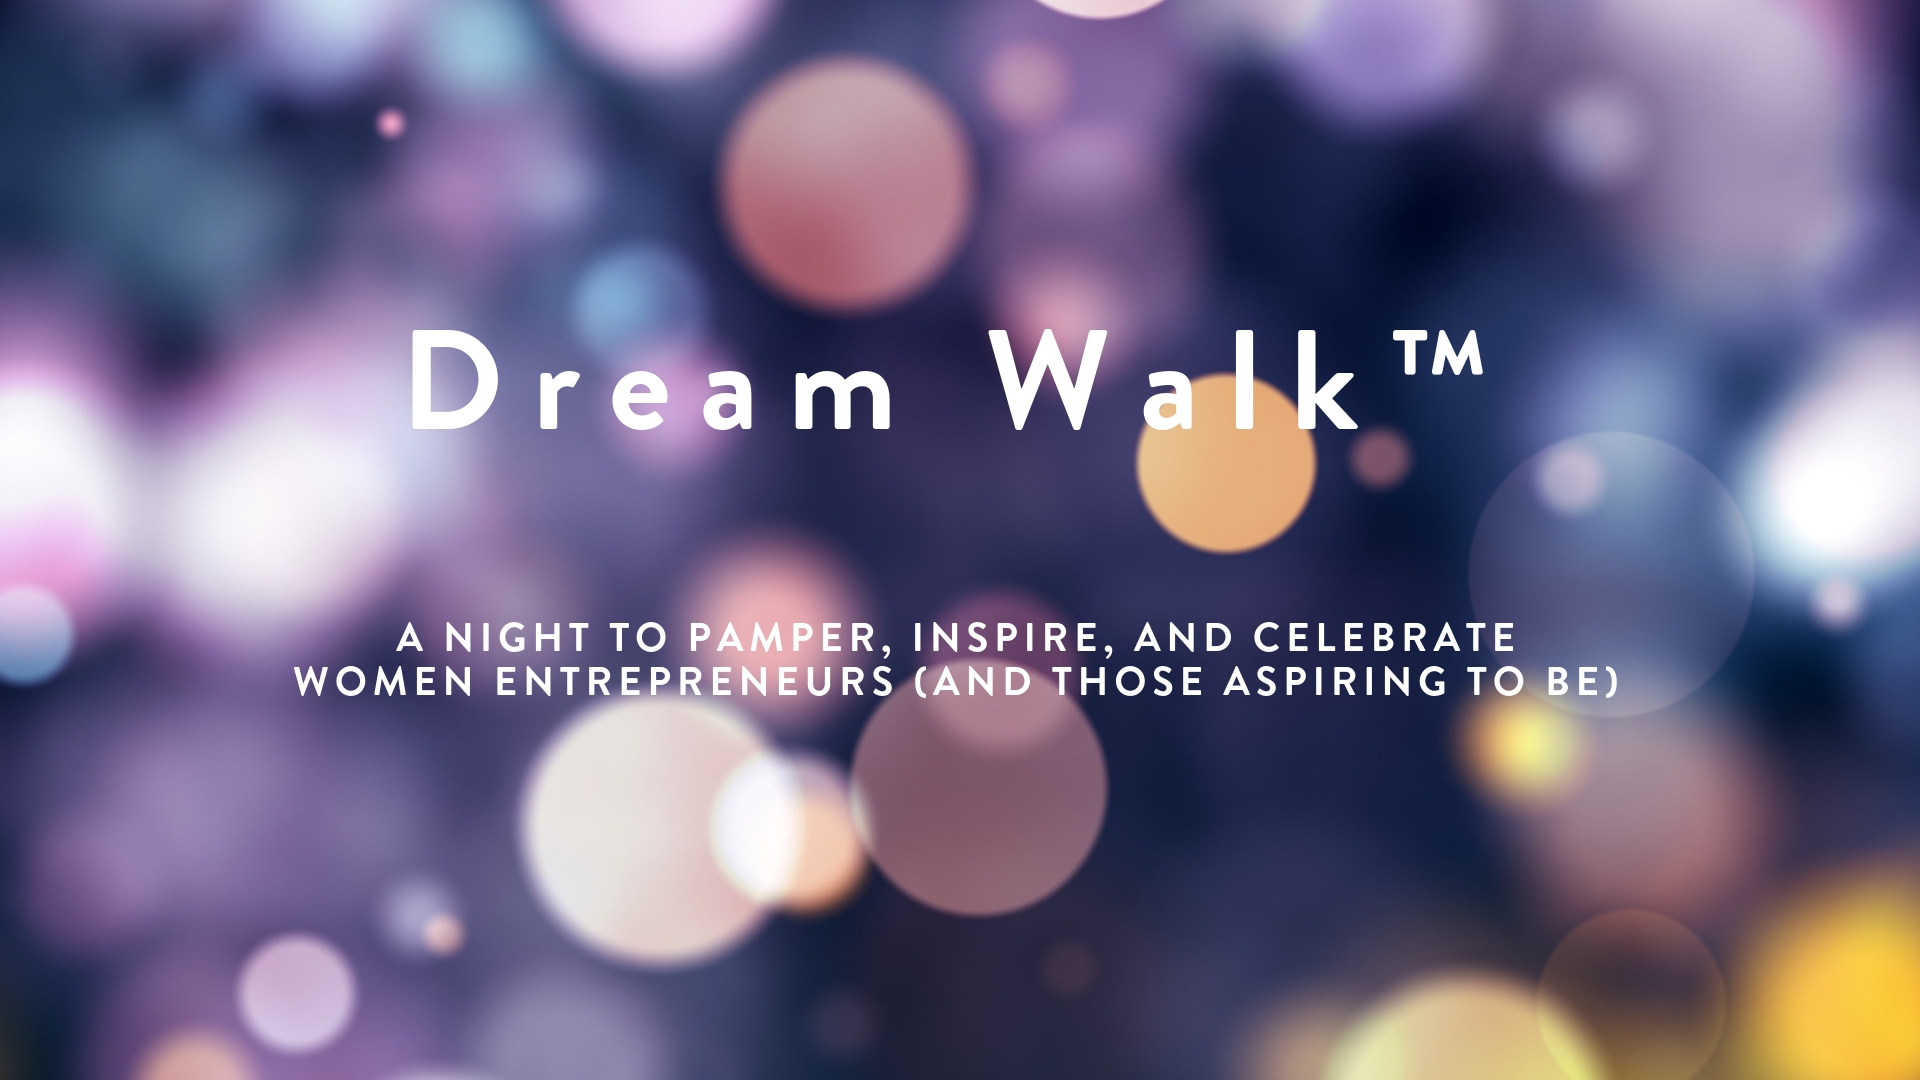 Dream Walk Event - a night to inspire, pamper, and celebrate women entrepreneurs